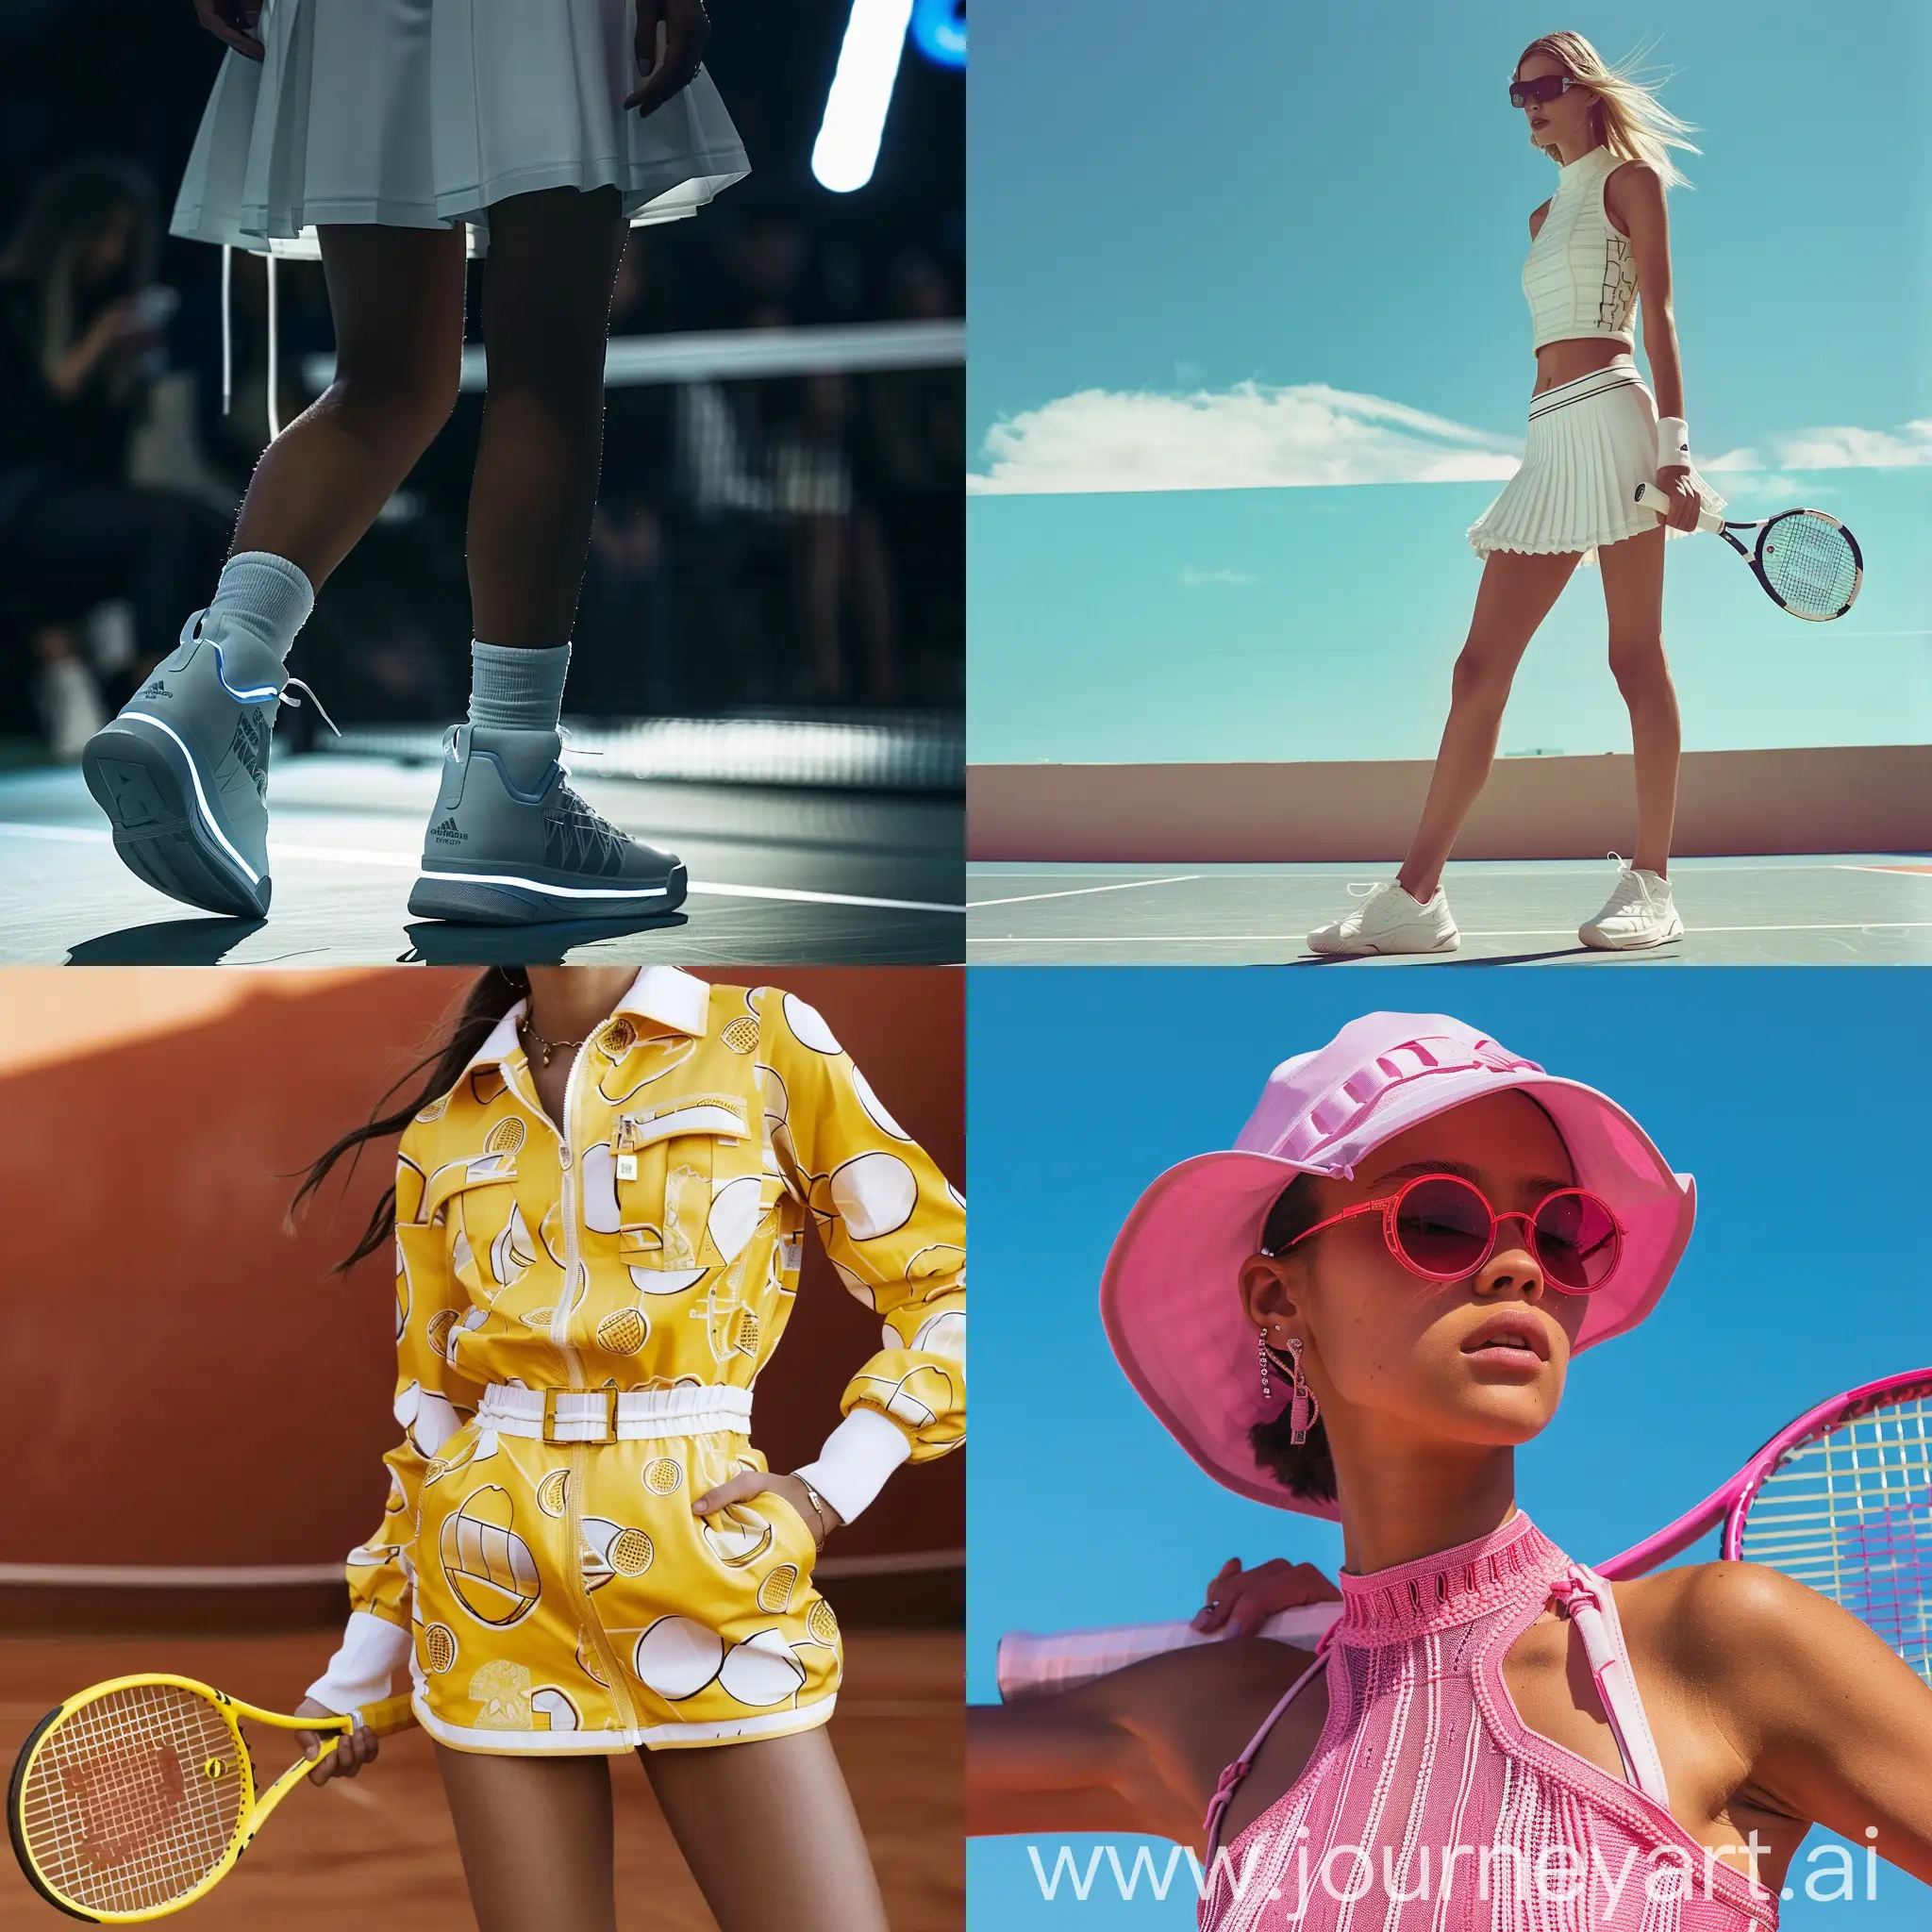 Elegant-Tennis-Players-in-High-Fashion-on-the-Court